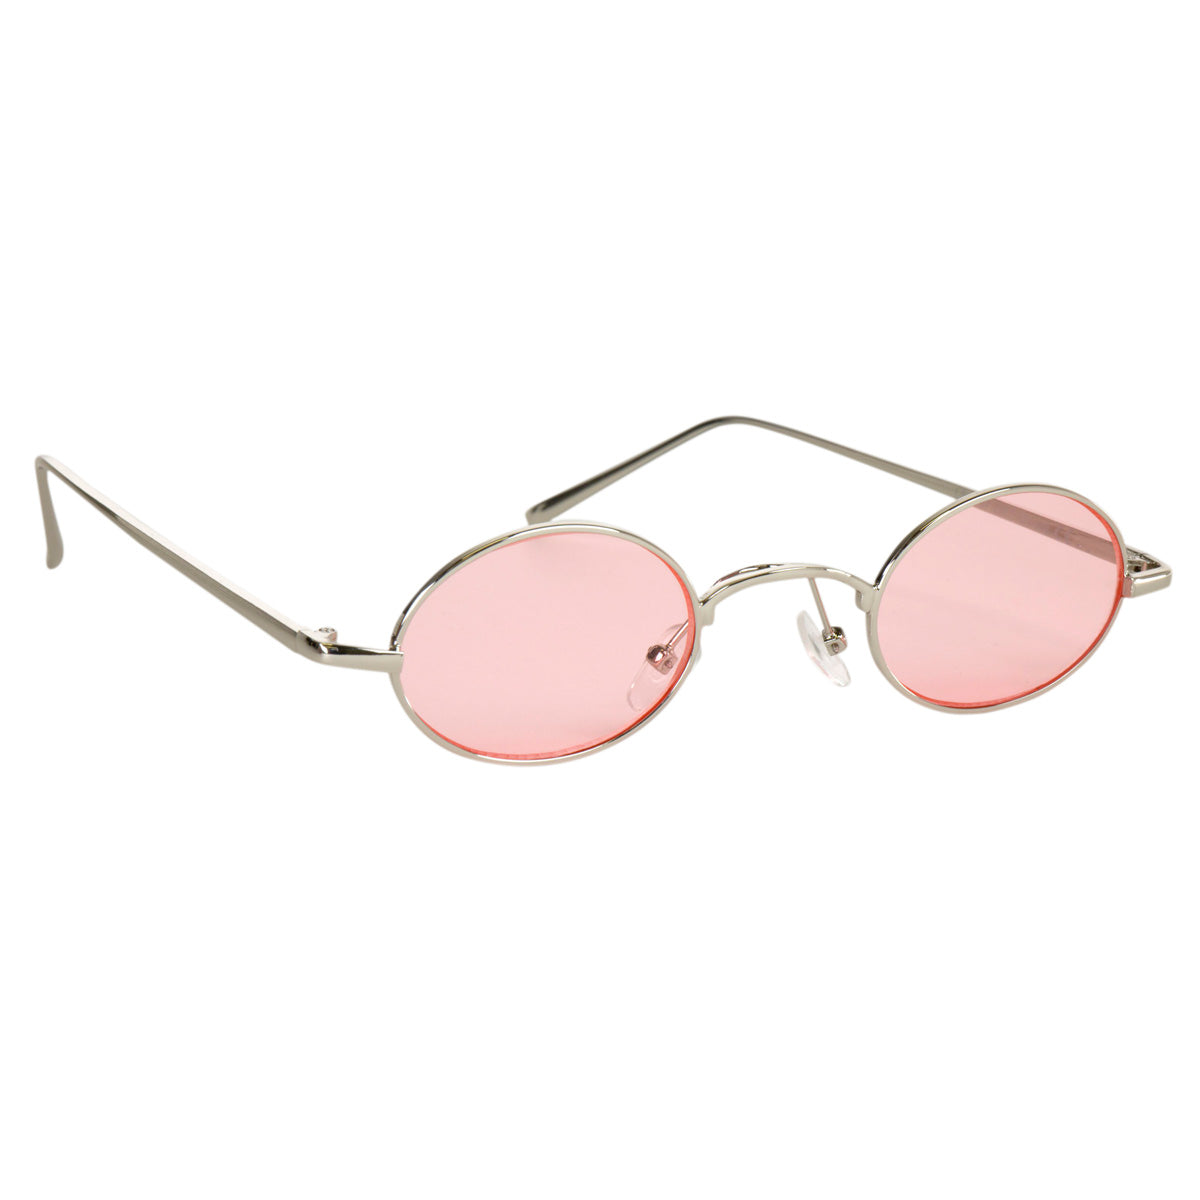 Oval for small sunglasses